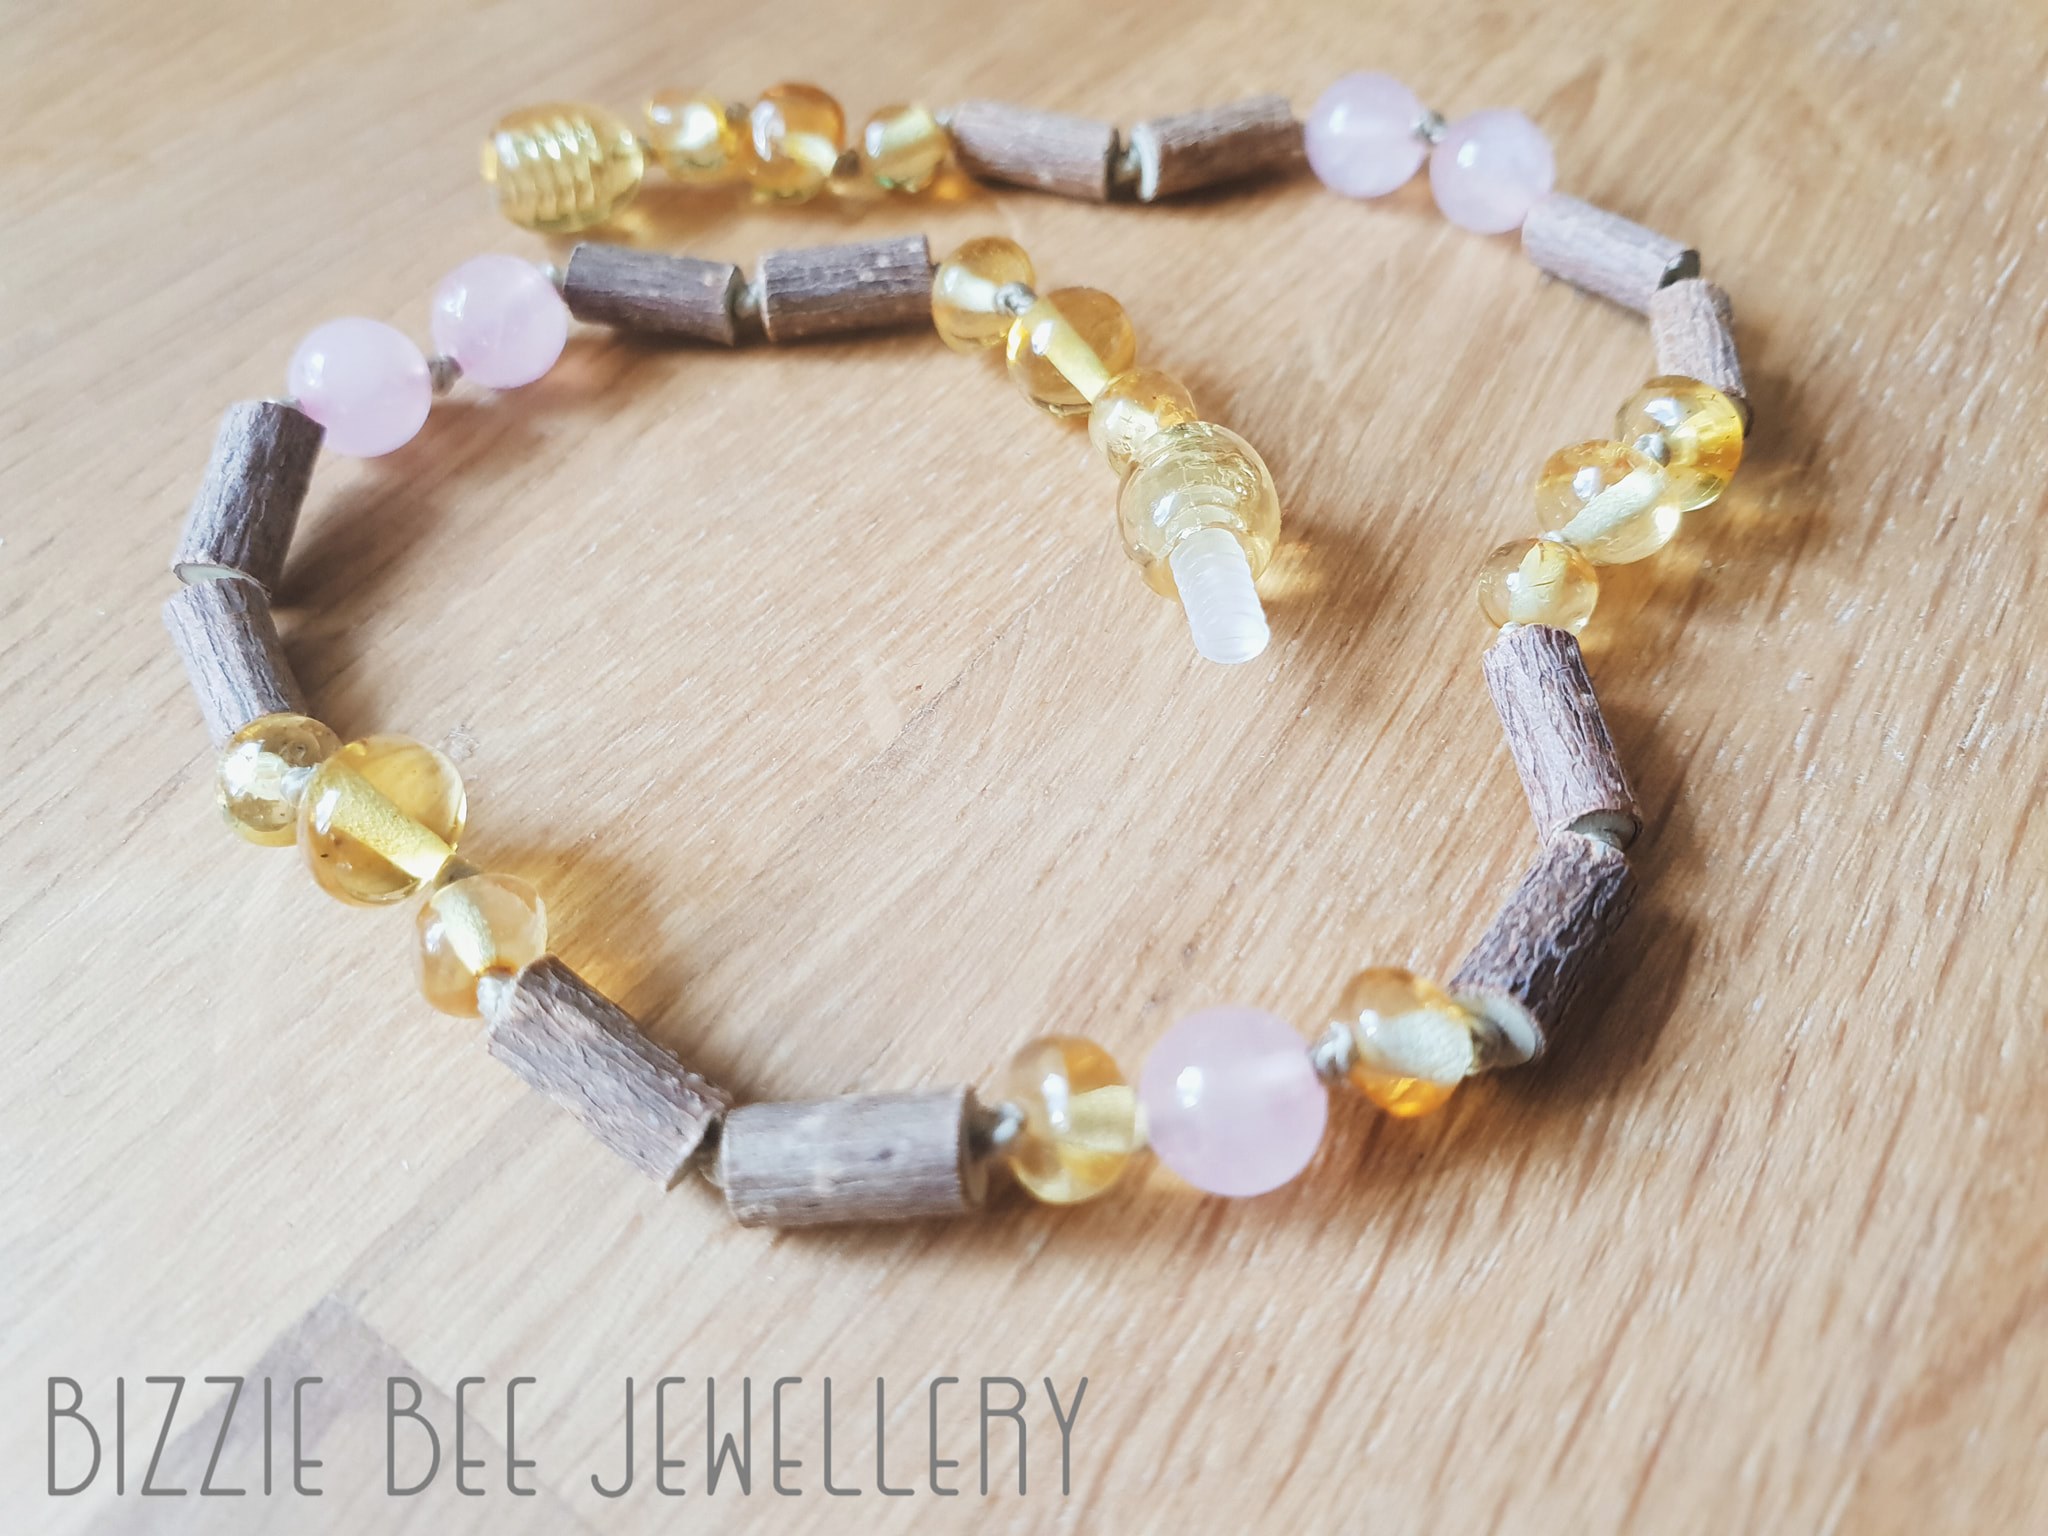 Peace and calm Hazelwood, rose quartz and Baltic amber necklace